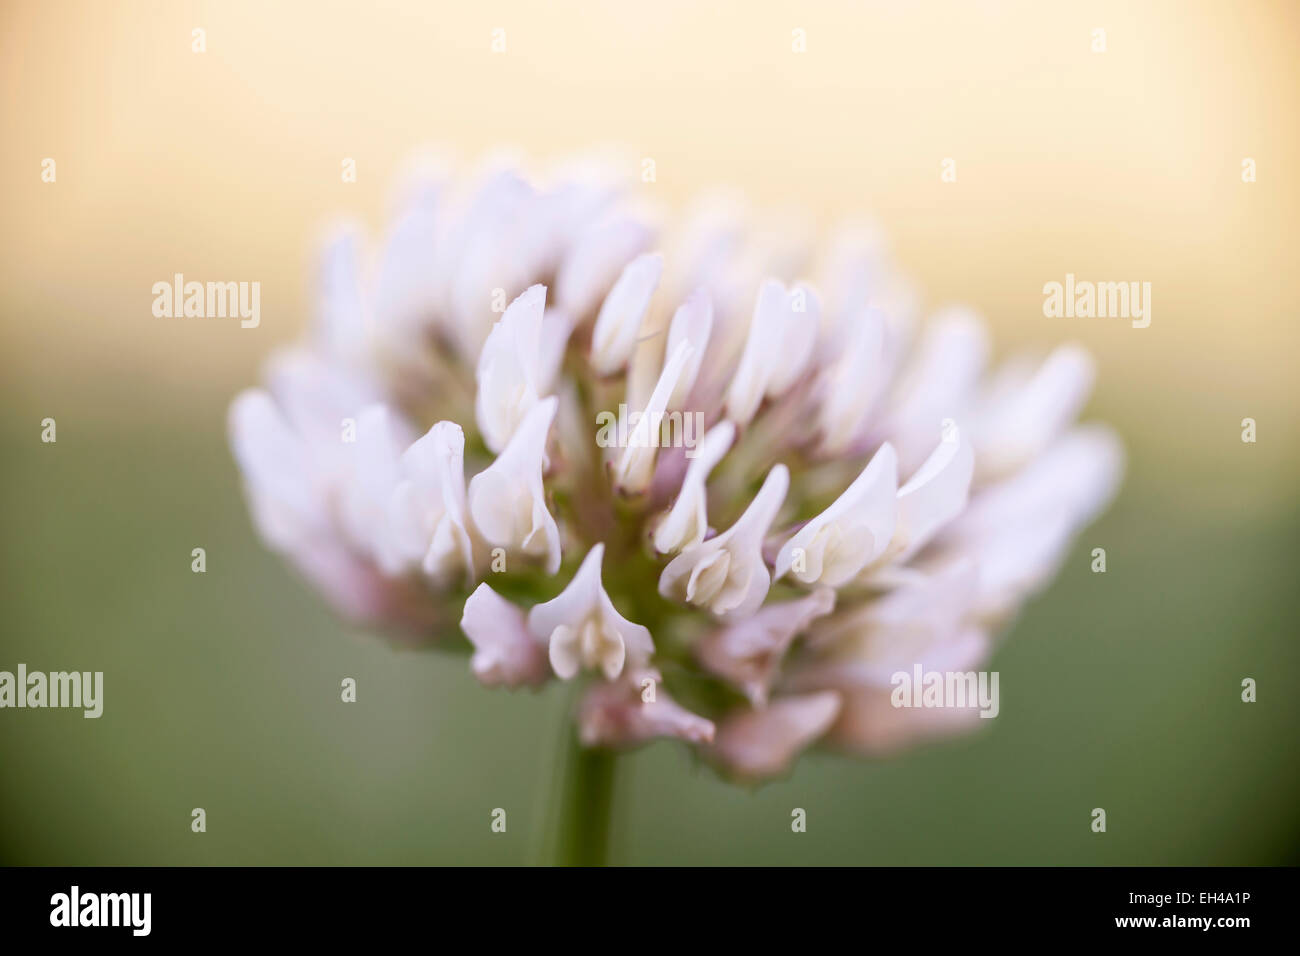 Macro closeup of clover flower head with white and pink petals Stock Photo